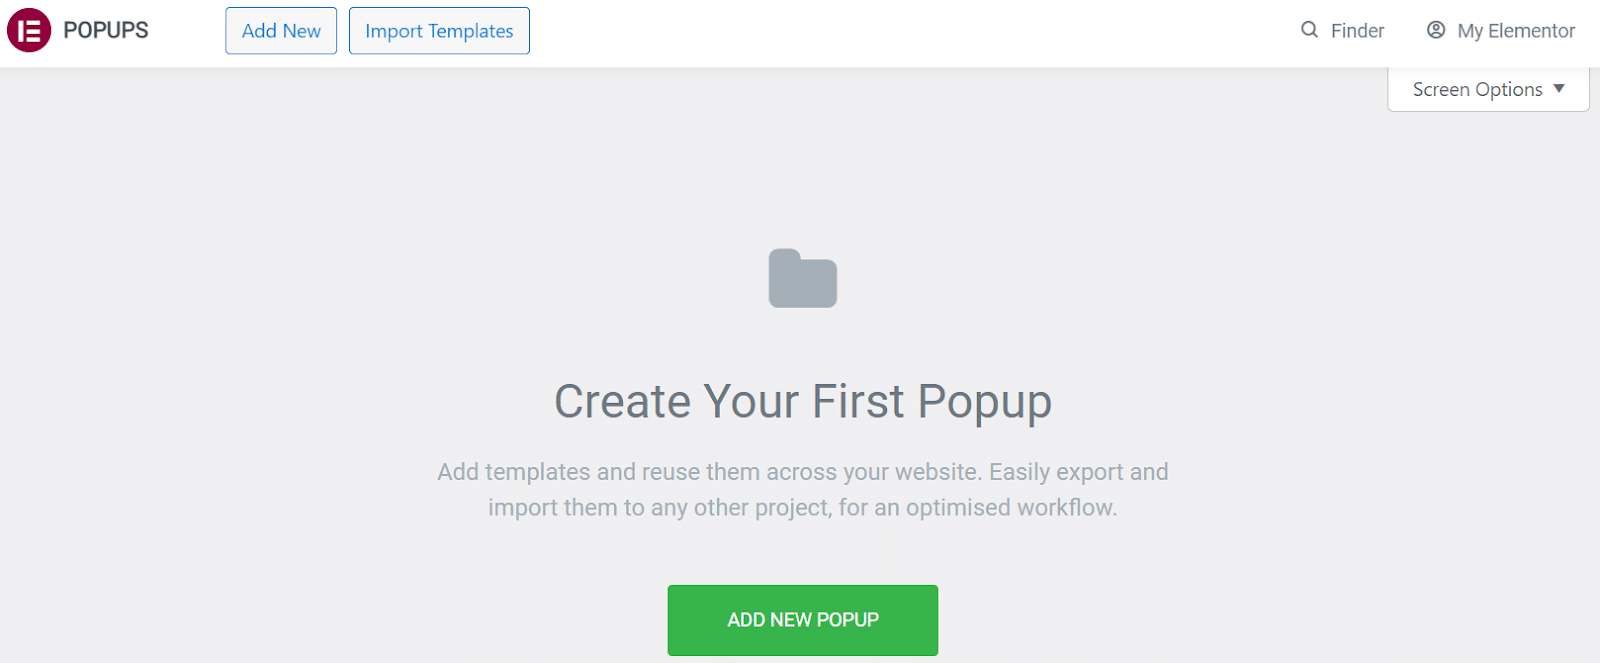 Add a new popup in templates